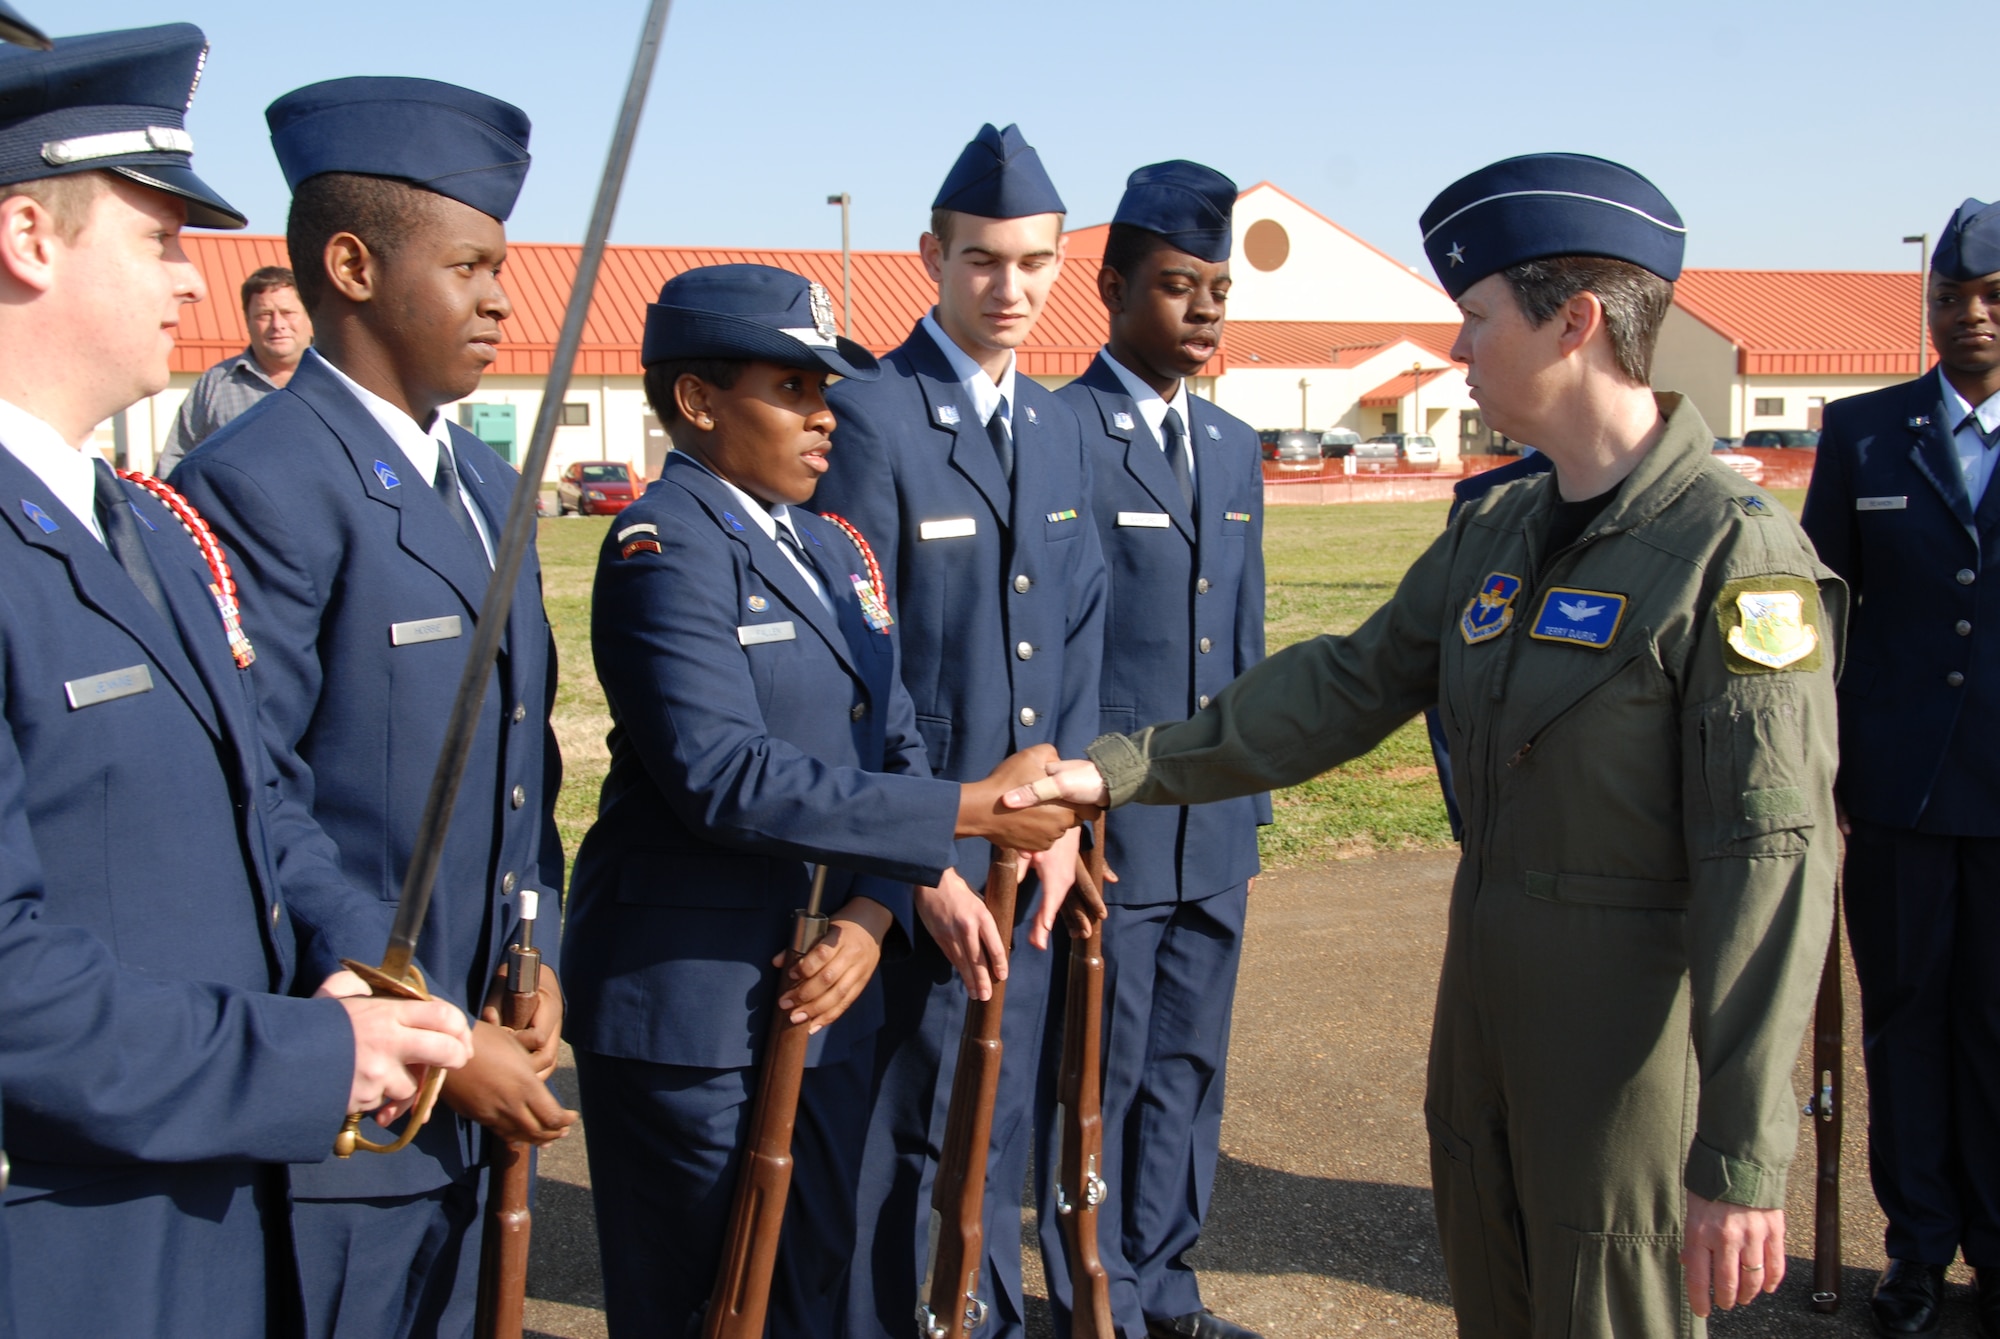 Brig. Gen. Teresa Djuric, Holm Center commander, meets with Air Force JROTC cadets from Robert E. Lee High School in Montgomery, Ala. at the Thunder Over Alabama air show at Maxwell Air Force Base on March 27, 2010. The Maxwell Open House and Air Show is celebrating 100 years of flight over Alabama. (U.S. Air Force photo/Jamie Pitcher)